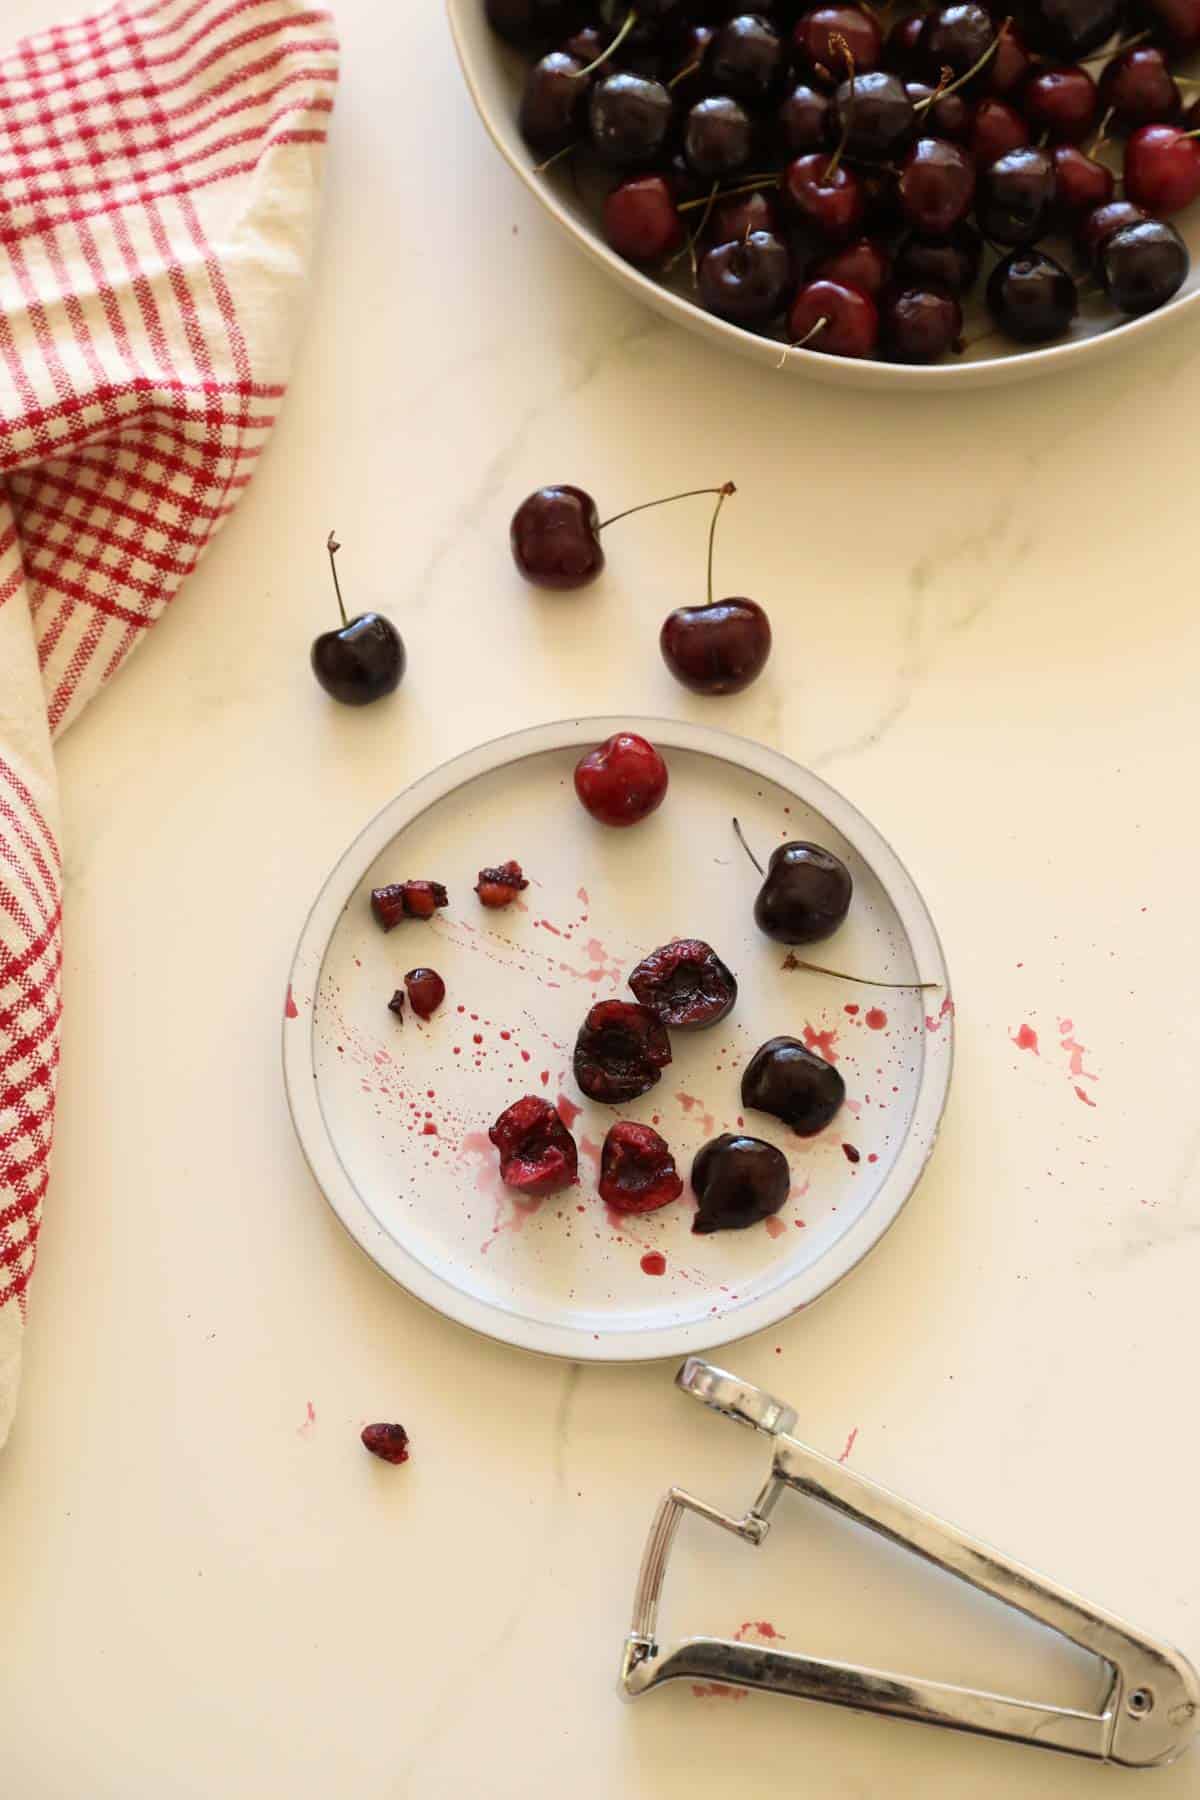 Cherries being pitted with a cherry pitter